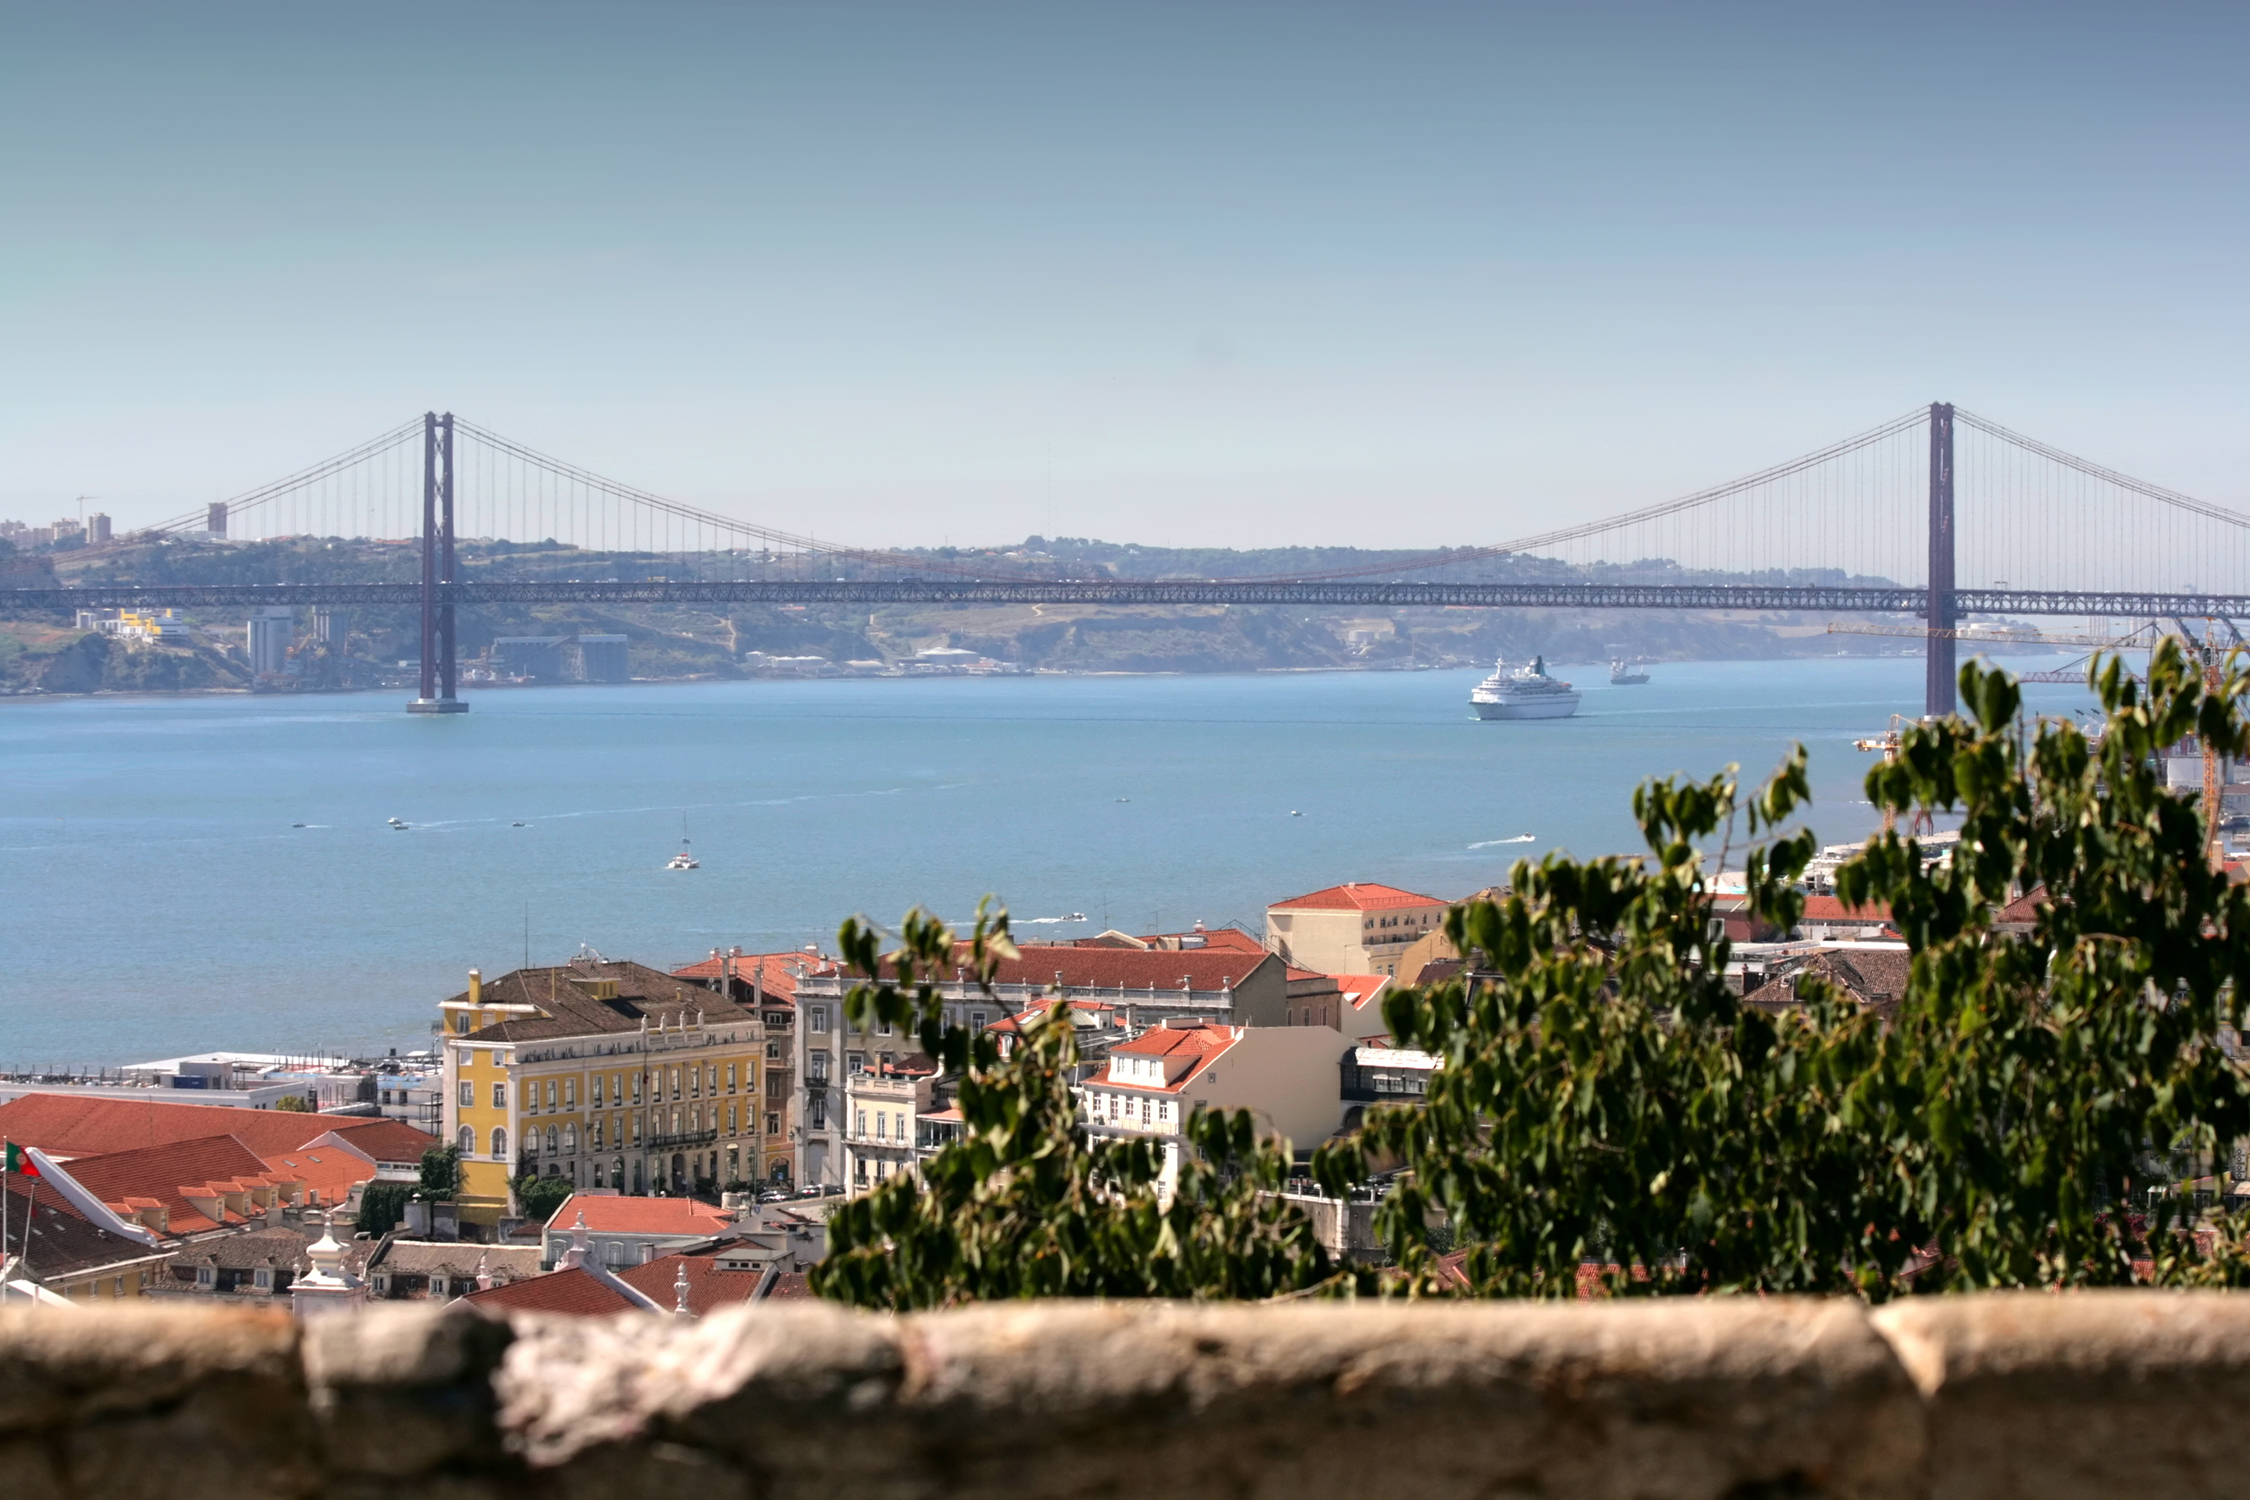 View from the top of the city, with the Tagus River in the background, and colorful facades of buildings